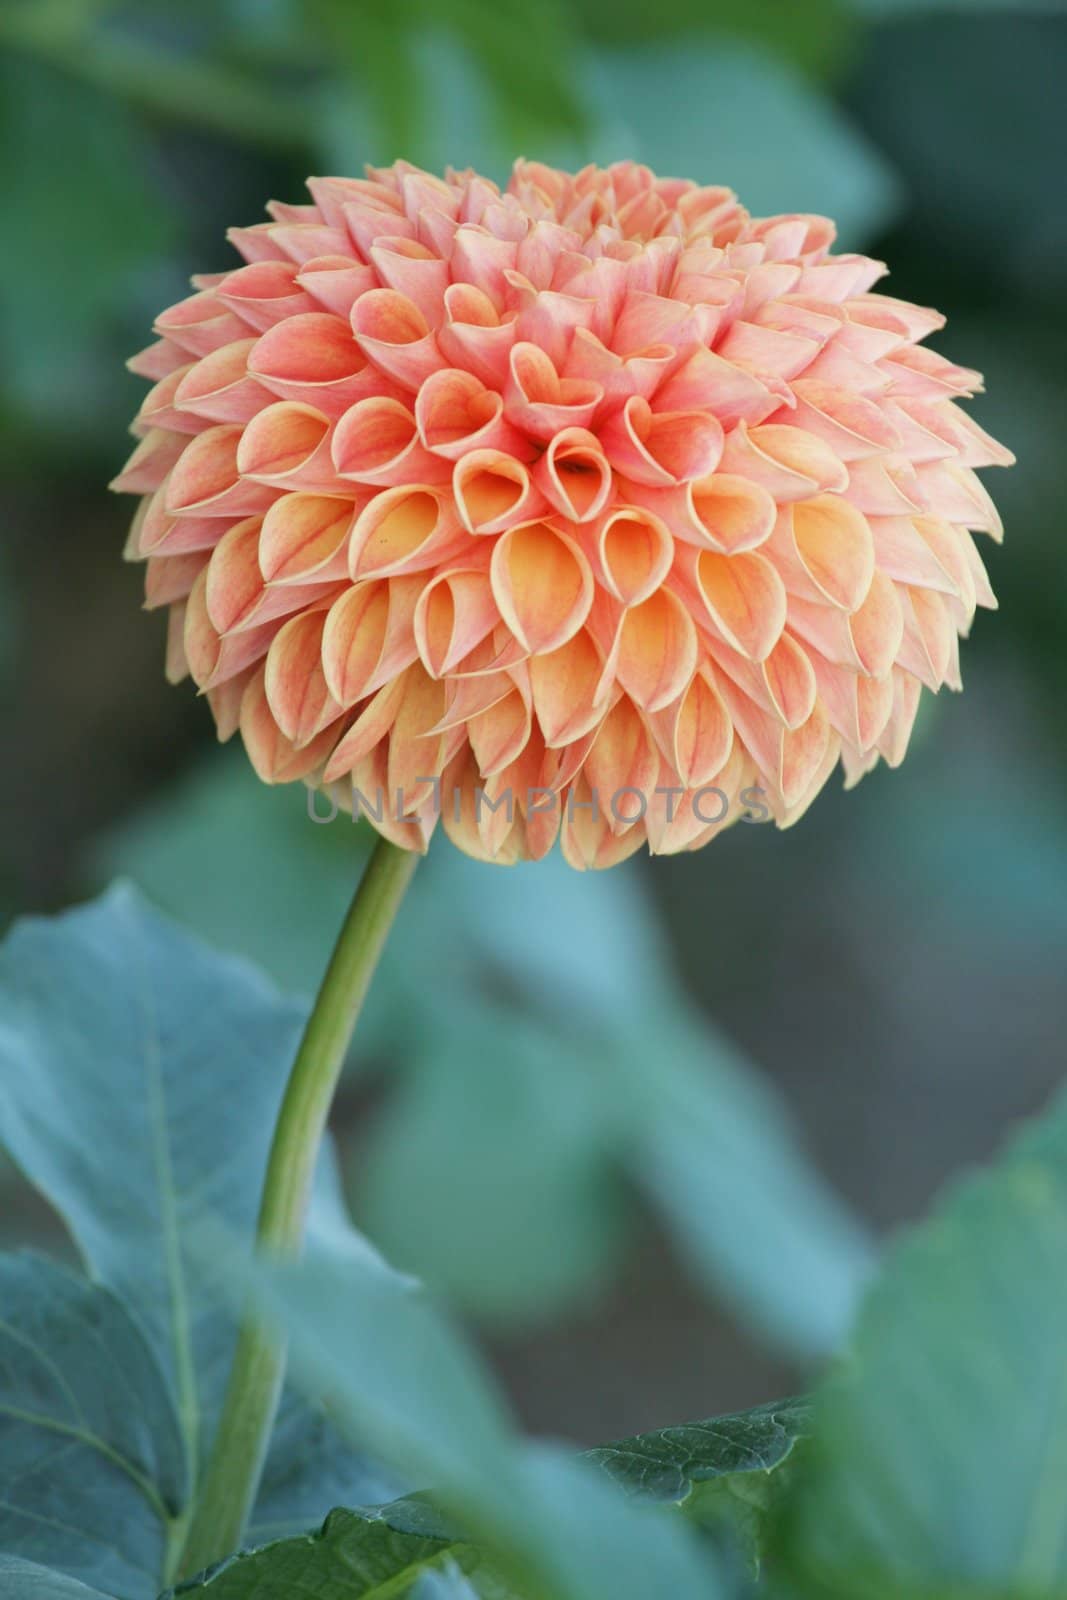 Perfectly formed peach colored dahlia flower in garden;